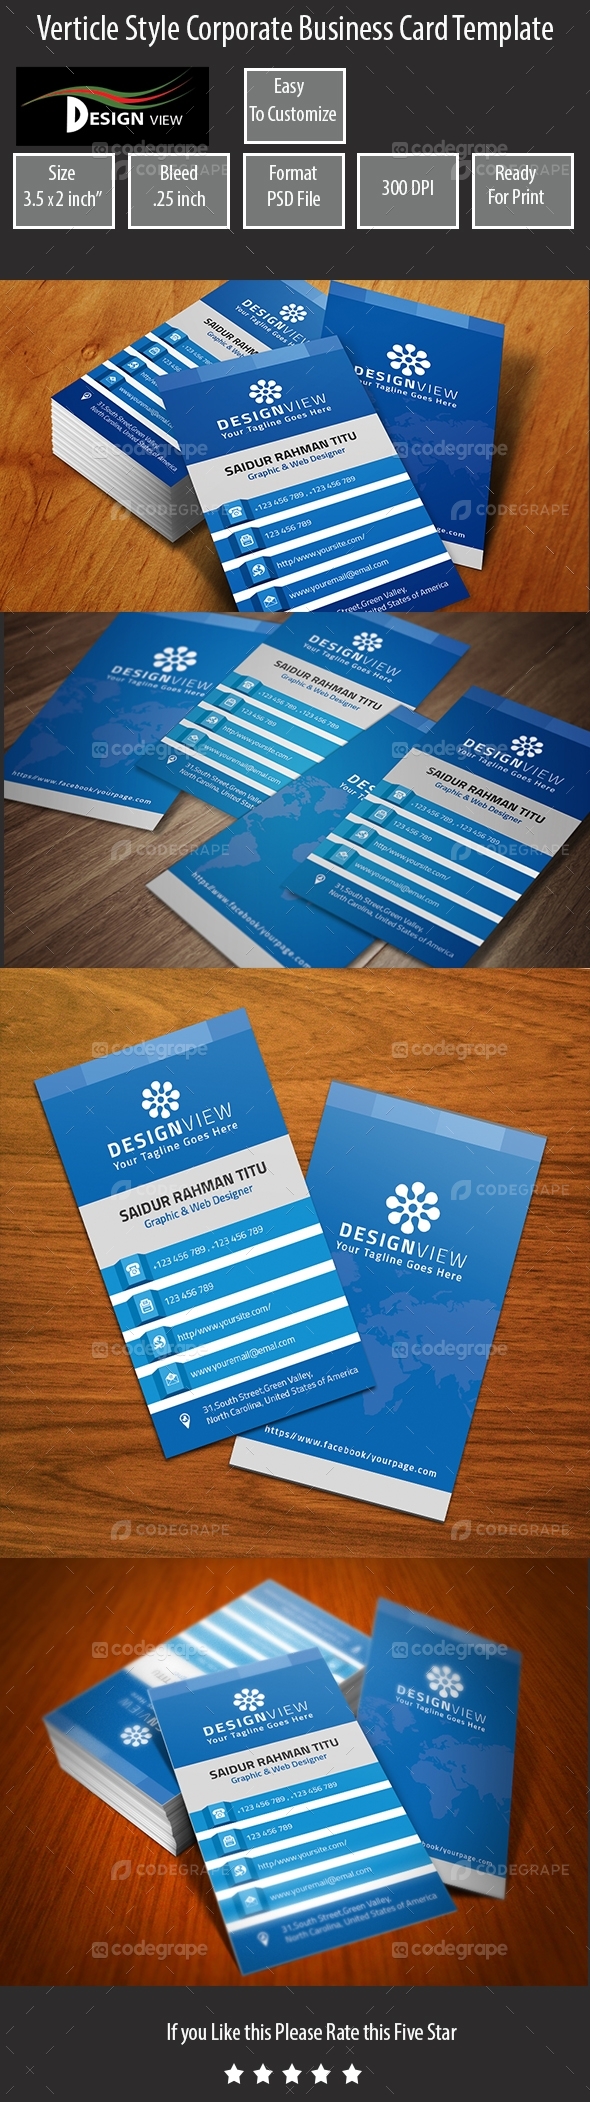 Verticle Style Corporate Business Card Template